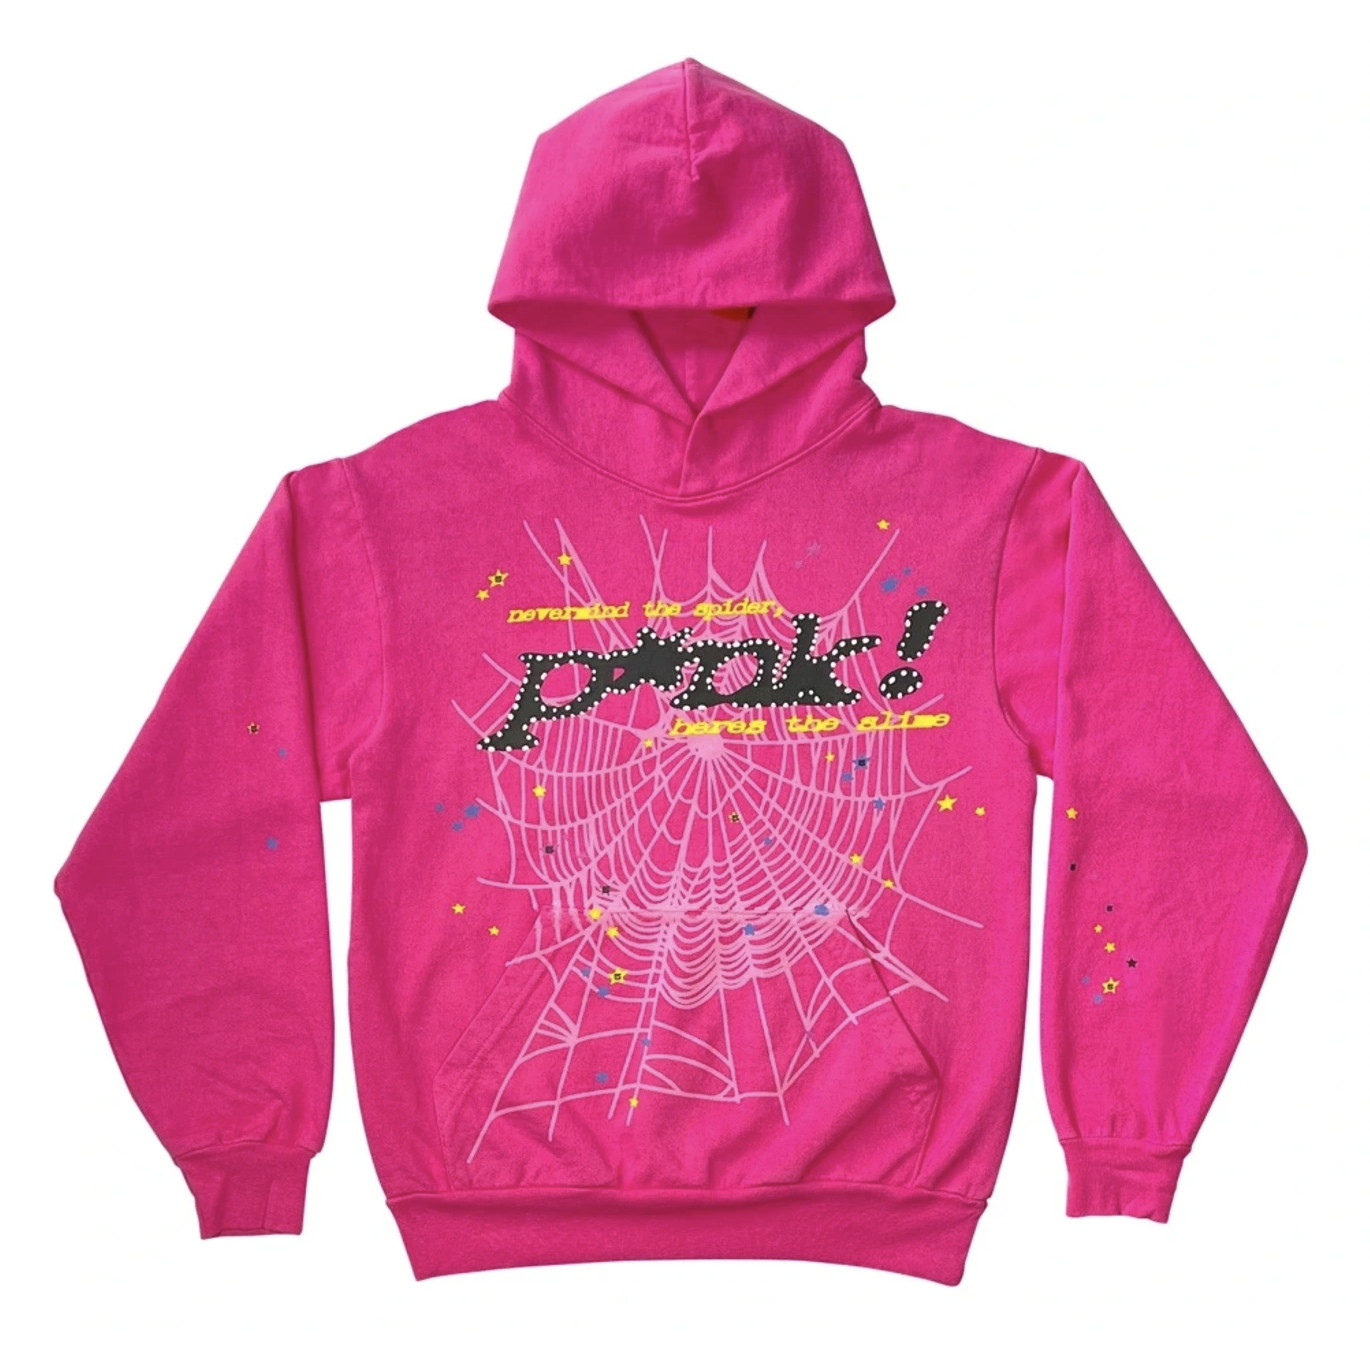 Sp5der P*NK Young Thug Hoodie from Young Thug